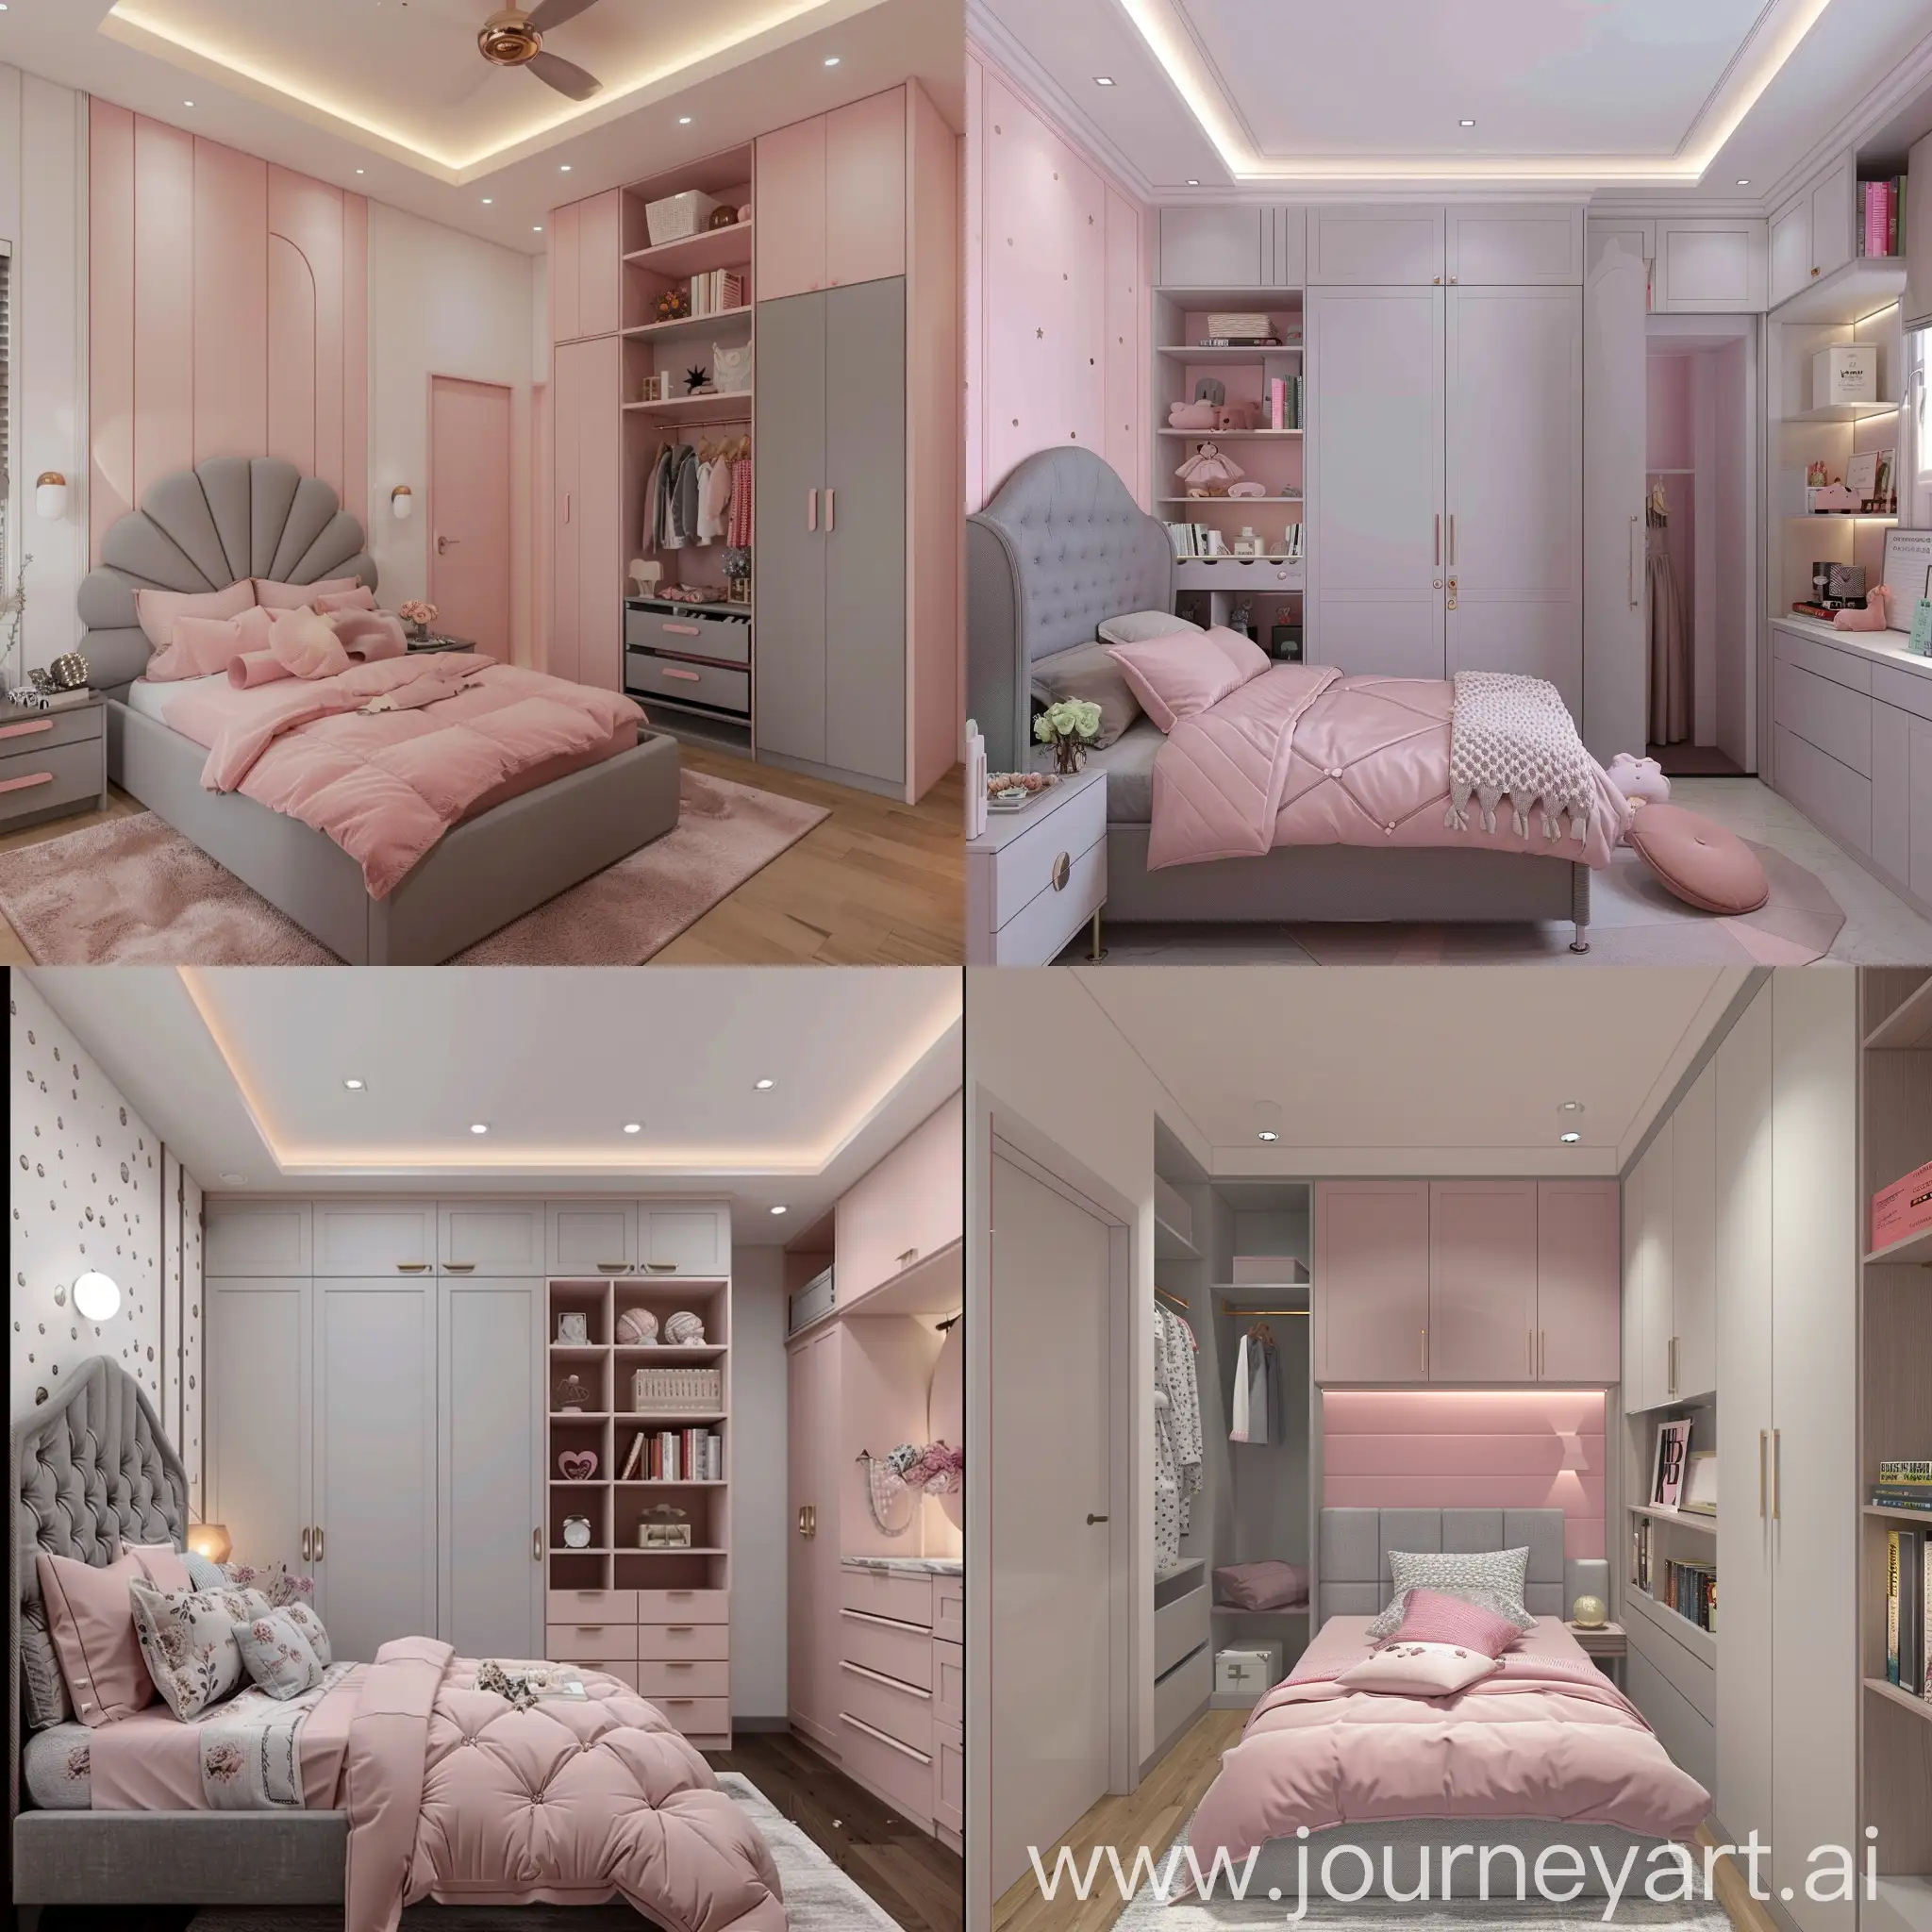 15ft long and 8ft wide bedroom for girls in light pink scheme color palette with grey furniture. bedroom consist of a bed besides room entrance door, bed back wall will be design in wall bedding roman theme. wardrobe will be place opposite to bed and dressing unit with book shelf in front of the wardrobe. ceiling and wall will be white, bed back wall will be in pink color palette scheme 